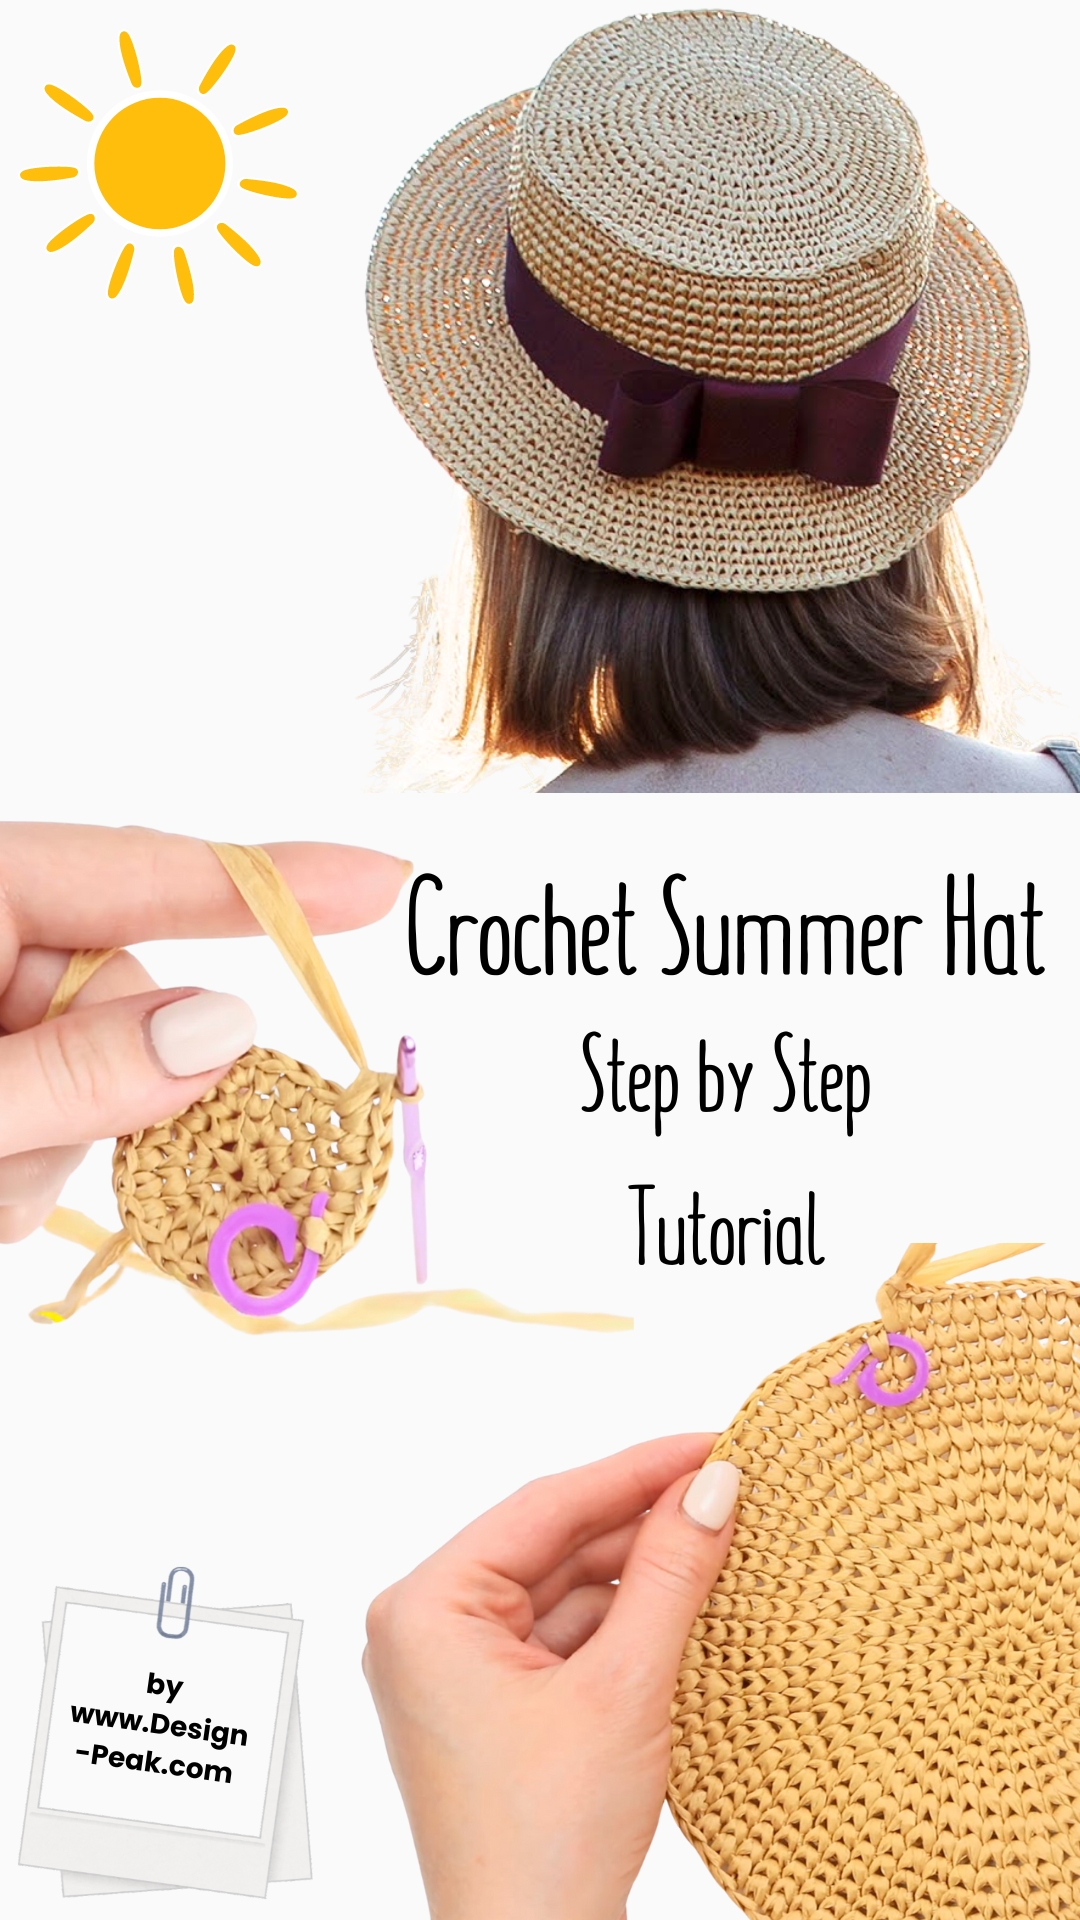 Step by Step Guide: Crochet Summer Hat